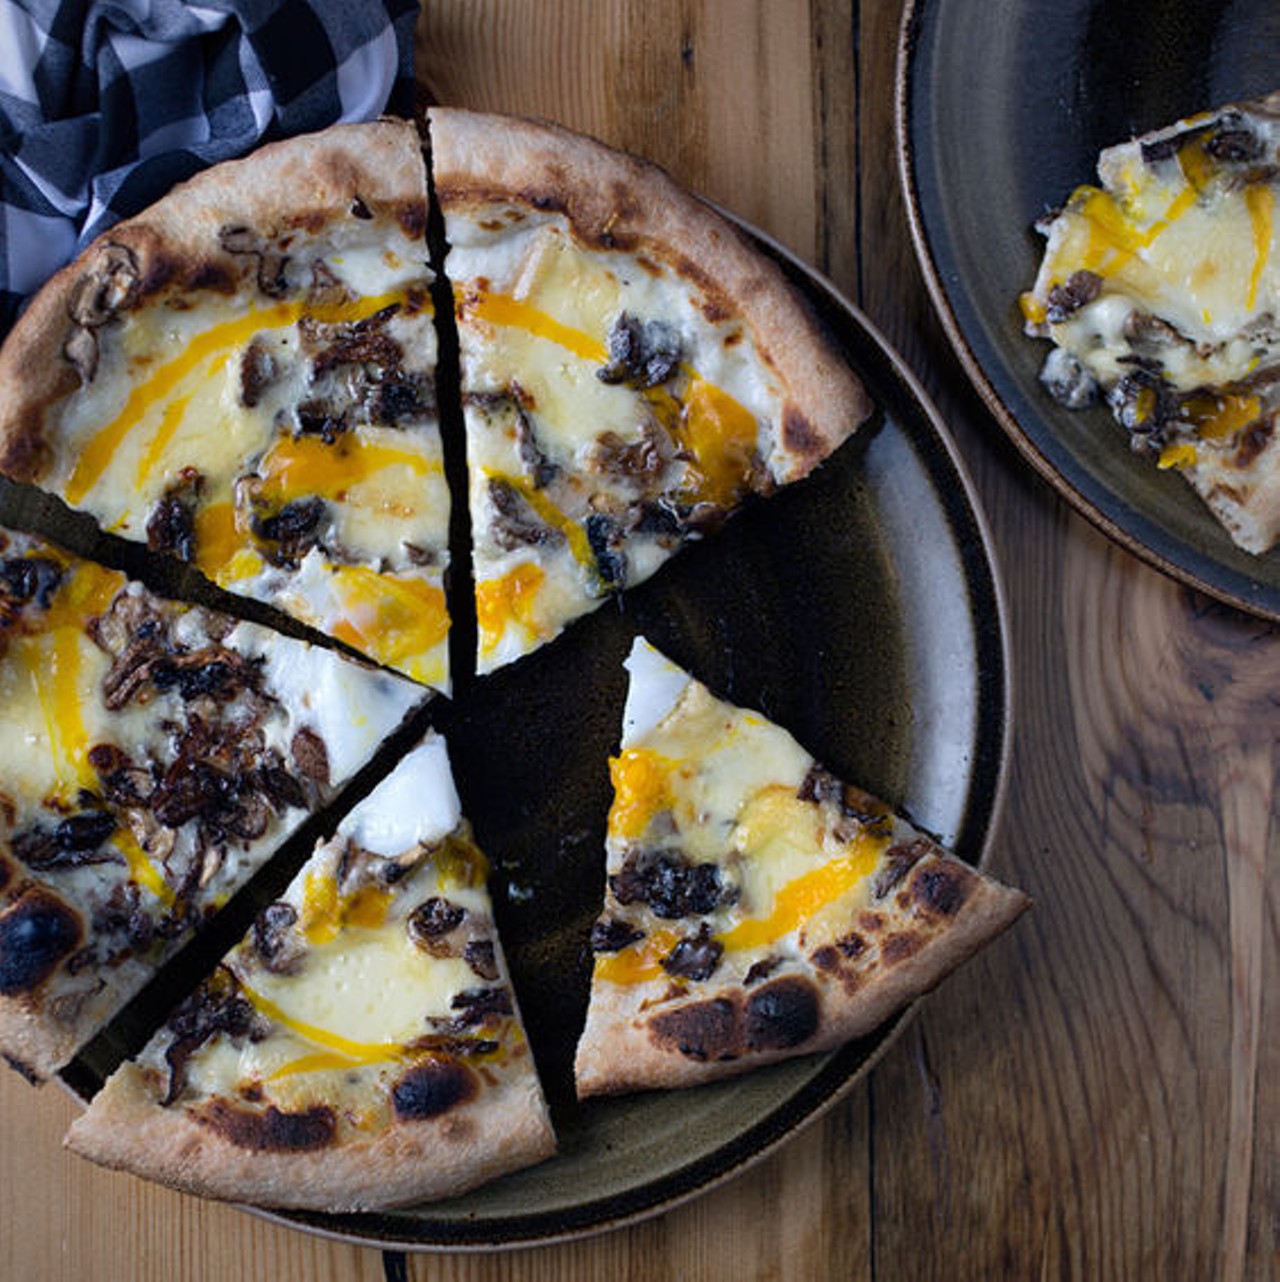 The "Donald" is a wood-fired pizza with wild mushrooms, duck egg and truffles. See more photos: Inside Basso at the Cheshire Inn.